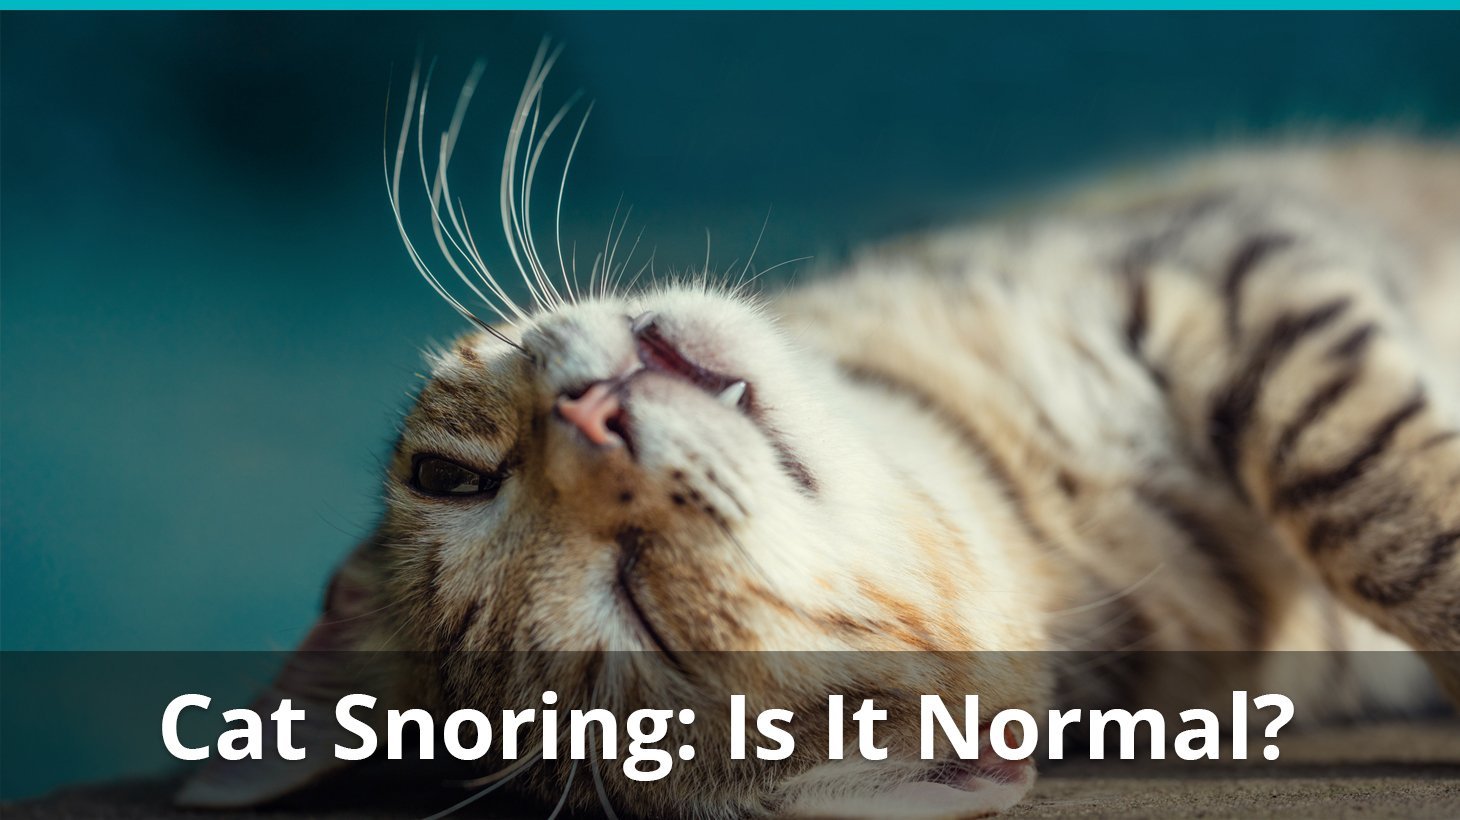 Cat Snoring While Sleeping Is It Normal Or Should I Be Worried